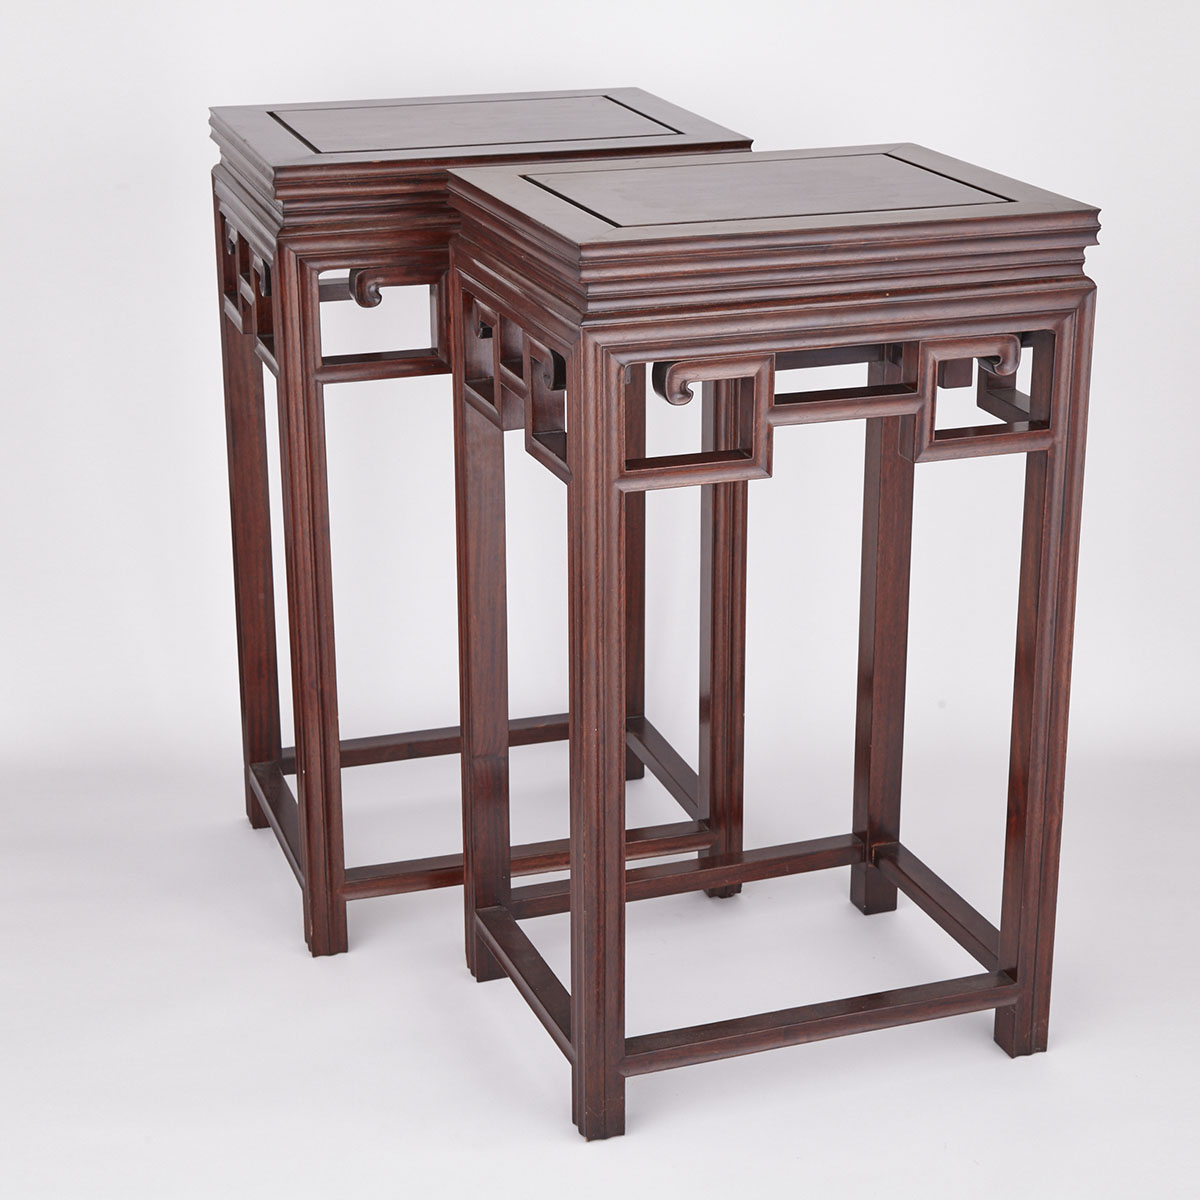 A Pair of Hardwood Side Tables, Early 20th Century